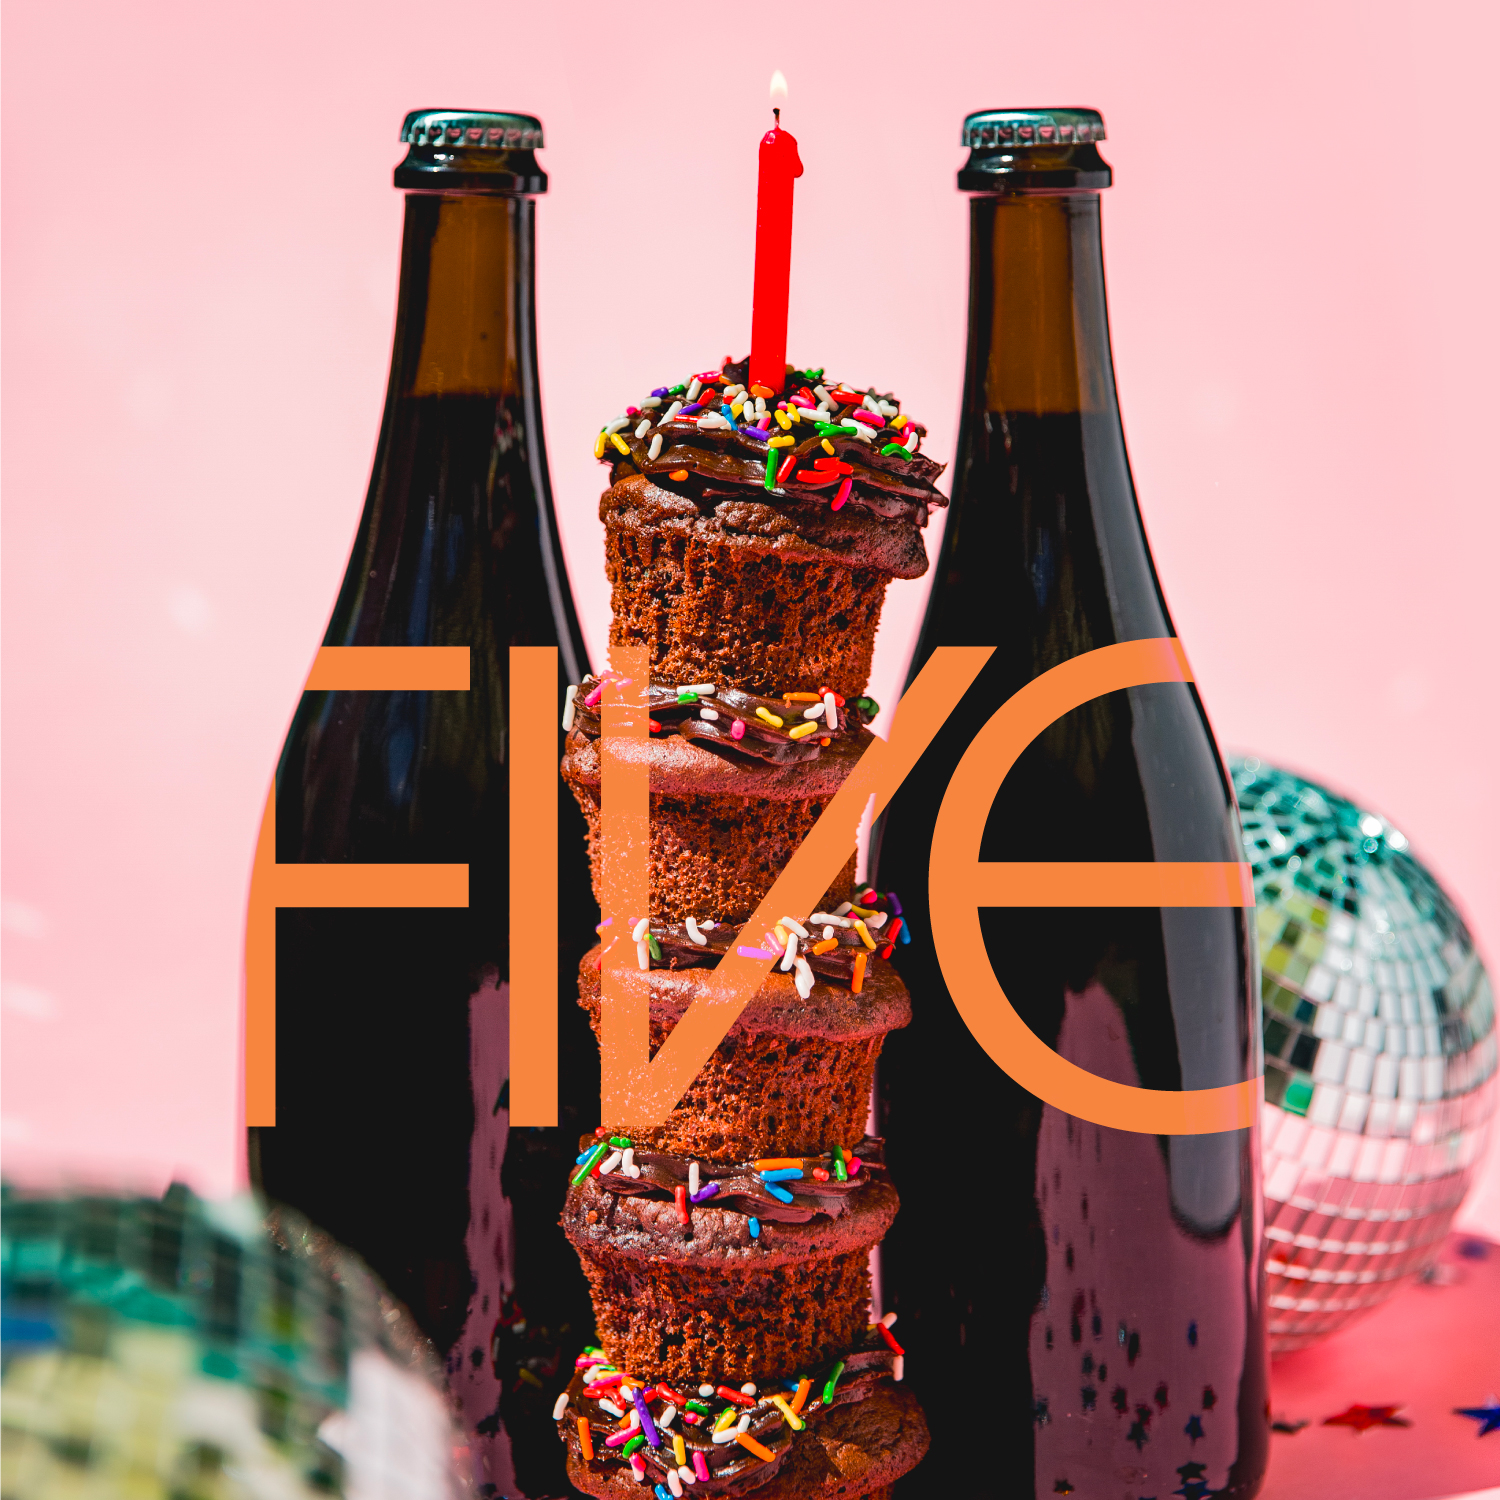 Graphic for Miel Brewery's 5th anniversary showing 5 stacked chocolate cupcakes and two 750 ml bottles in the back